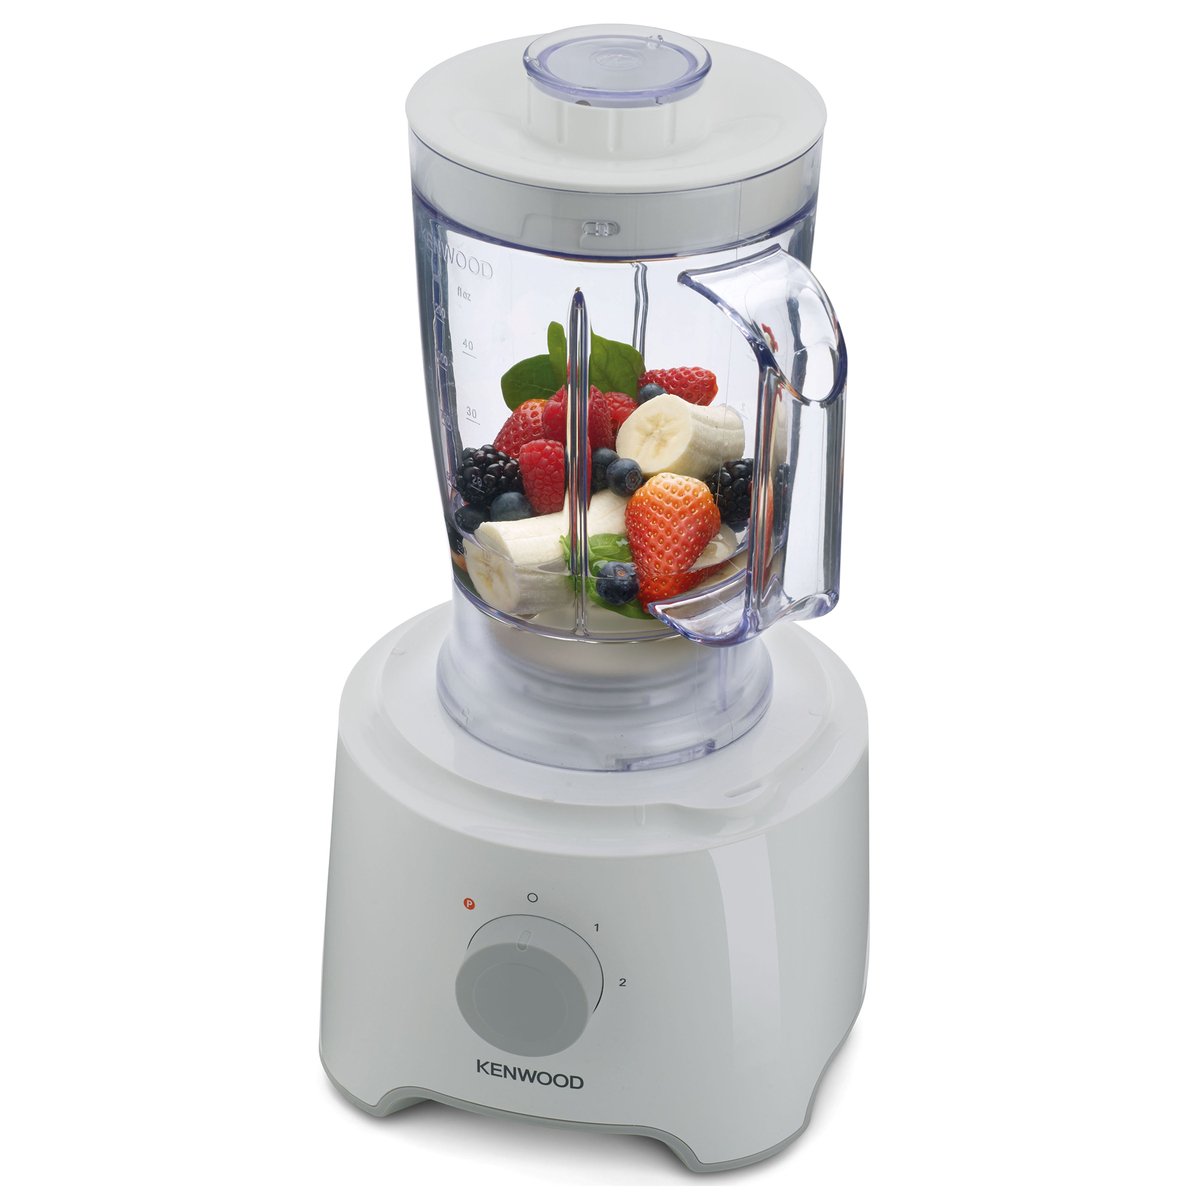 Kenwood Food Processor 800W Multi-Functional with Reversible Stainless Steel Disk, Blender, Whisk FDP301WH White